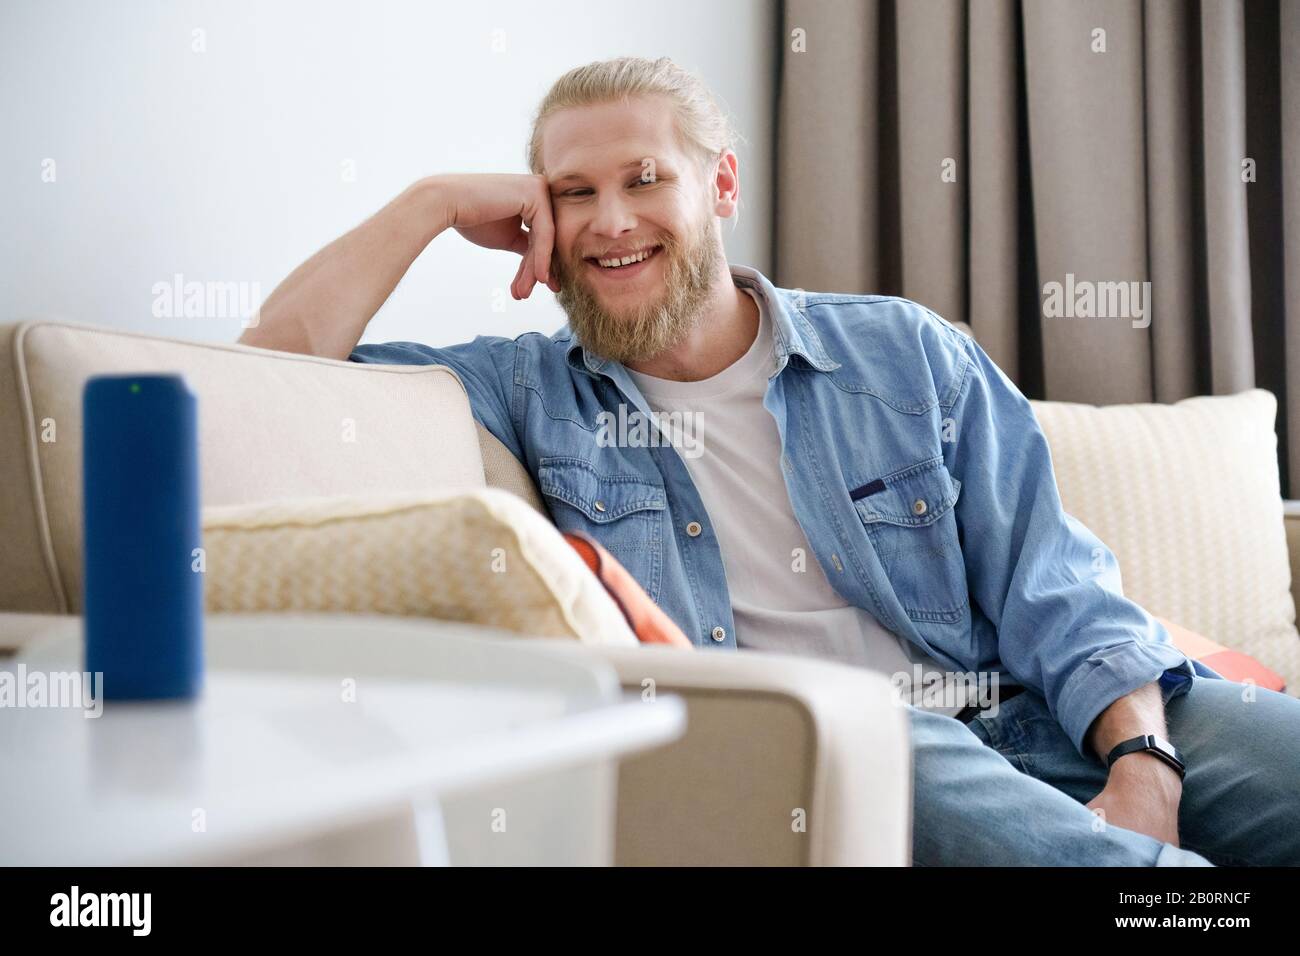 Smiling man relax on sofa look at camera use portable wireless speaker on table Stock Photo